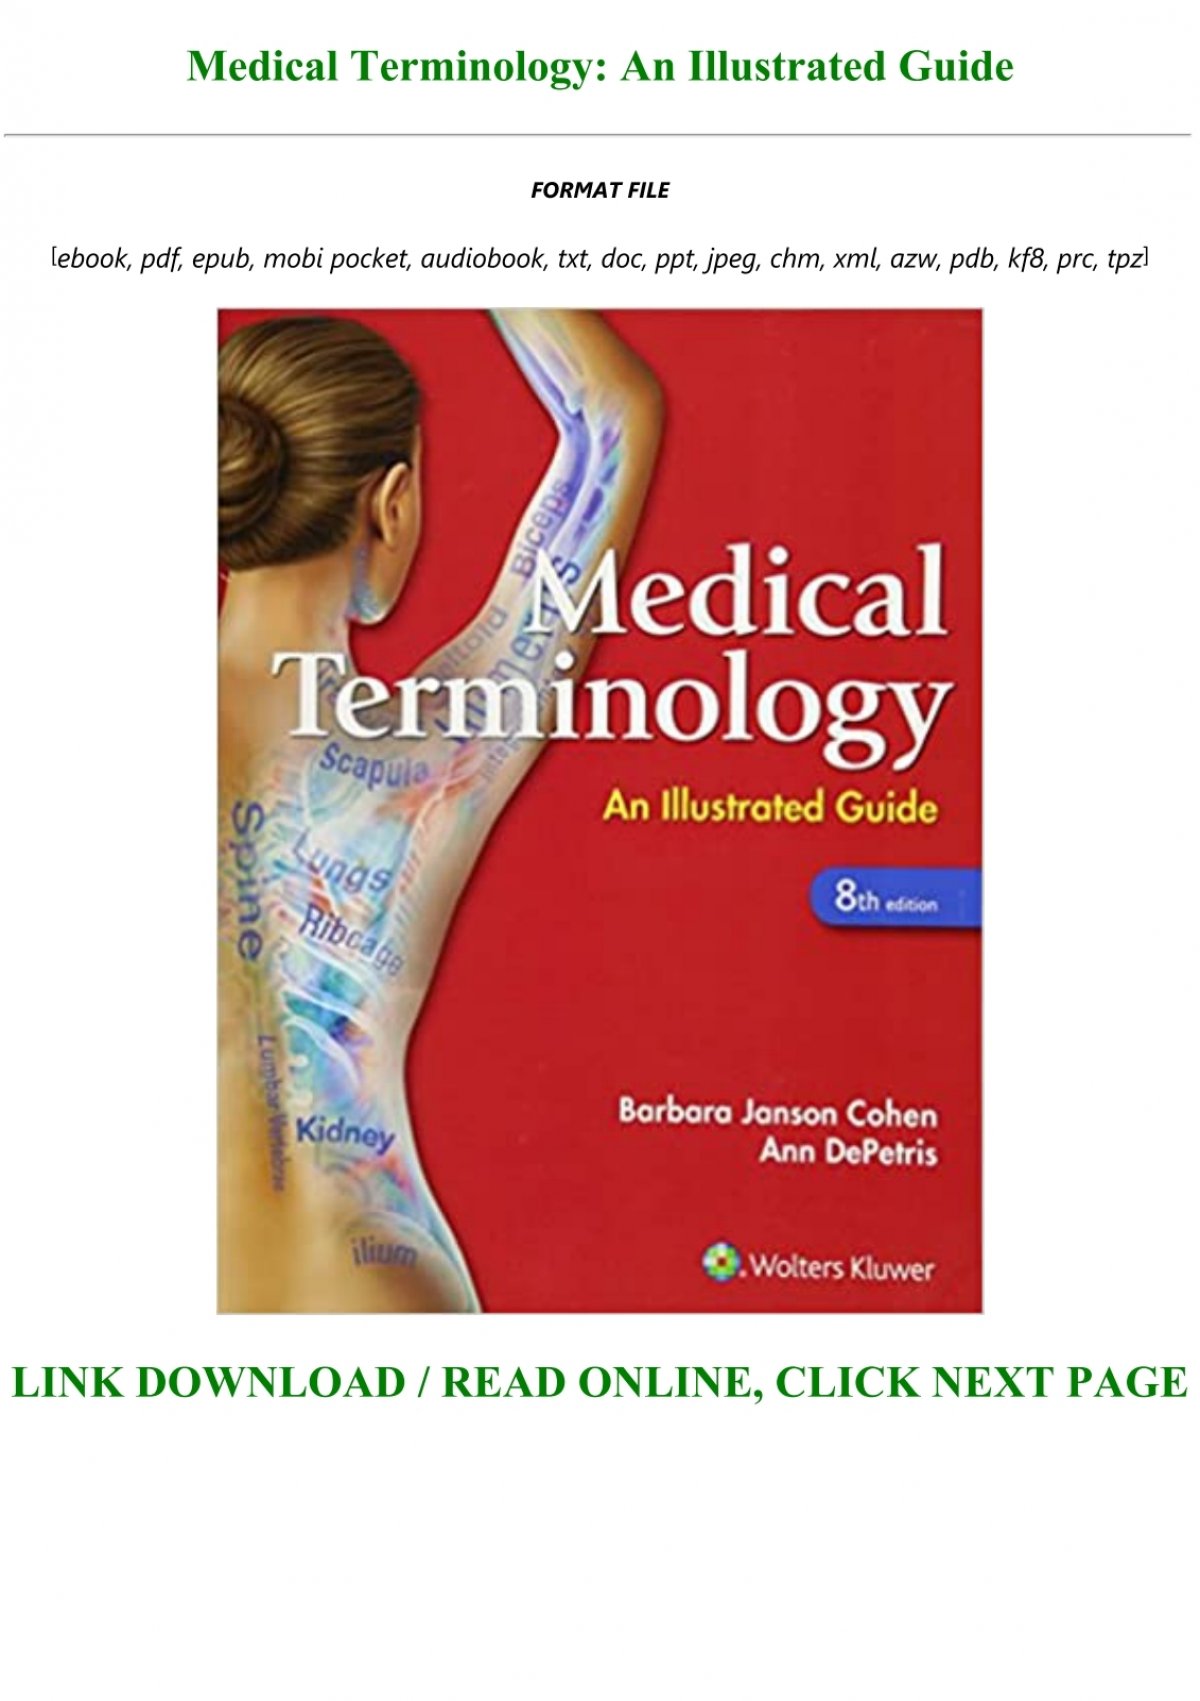 medical terminology an illustrated guide pdf free download